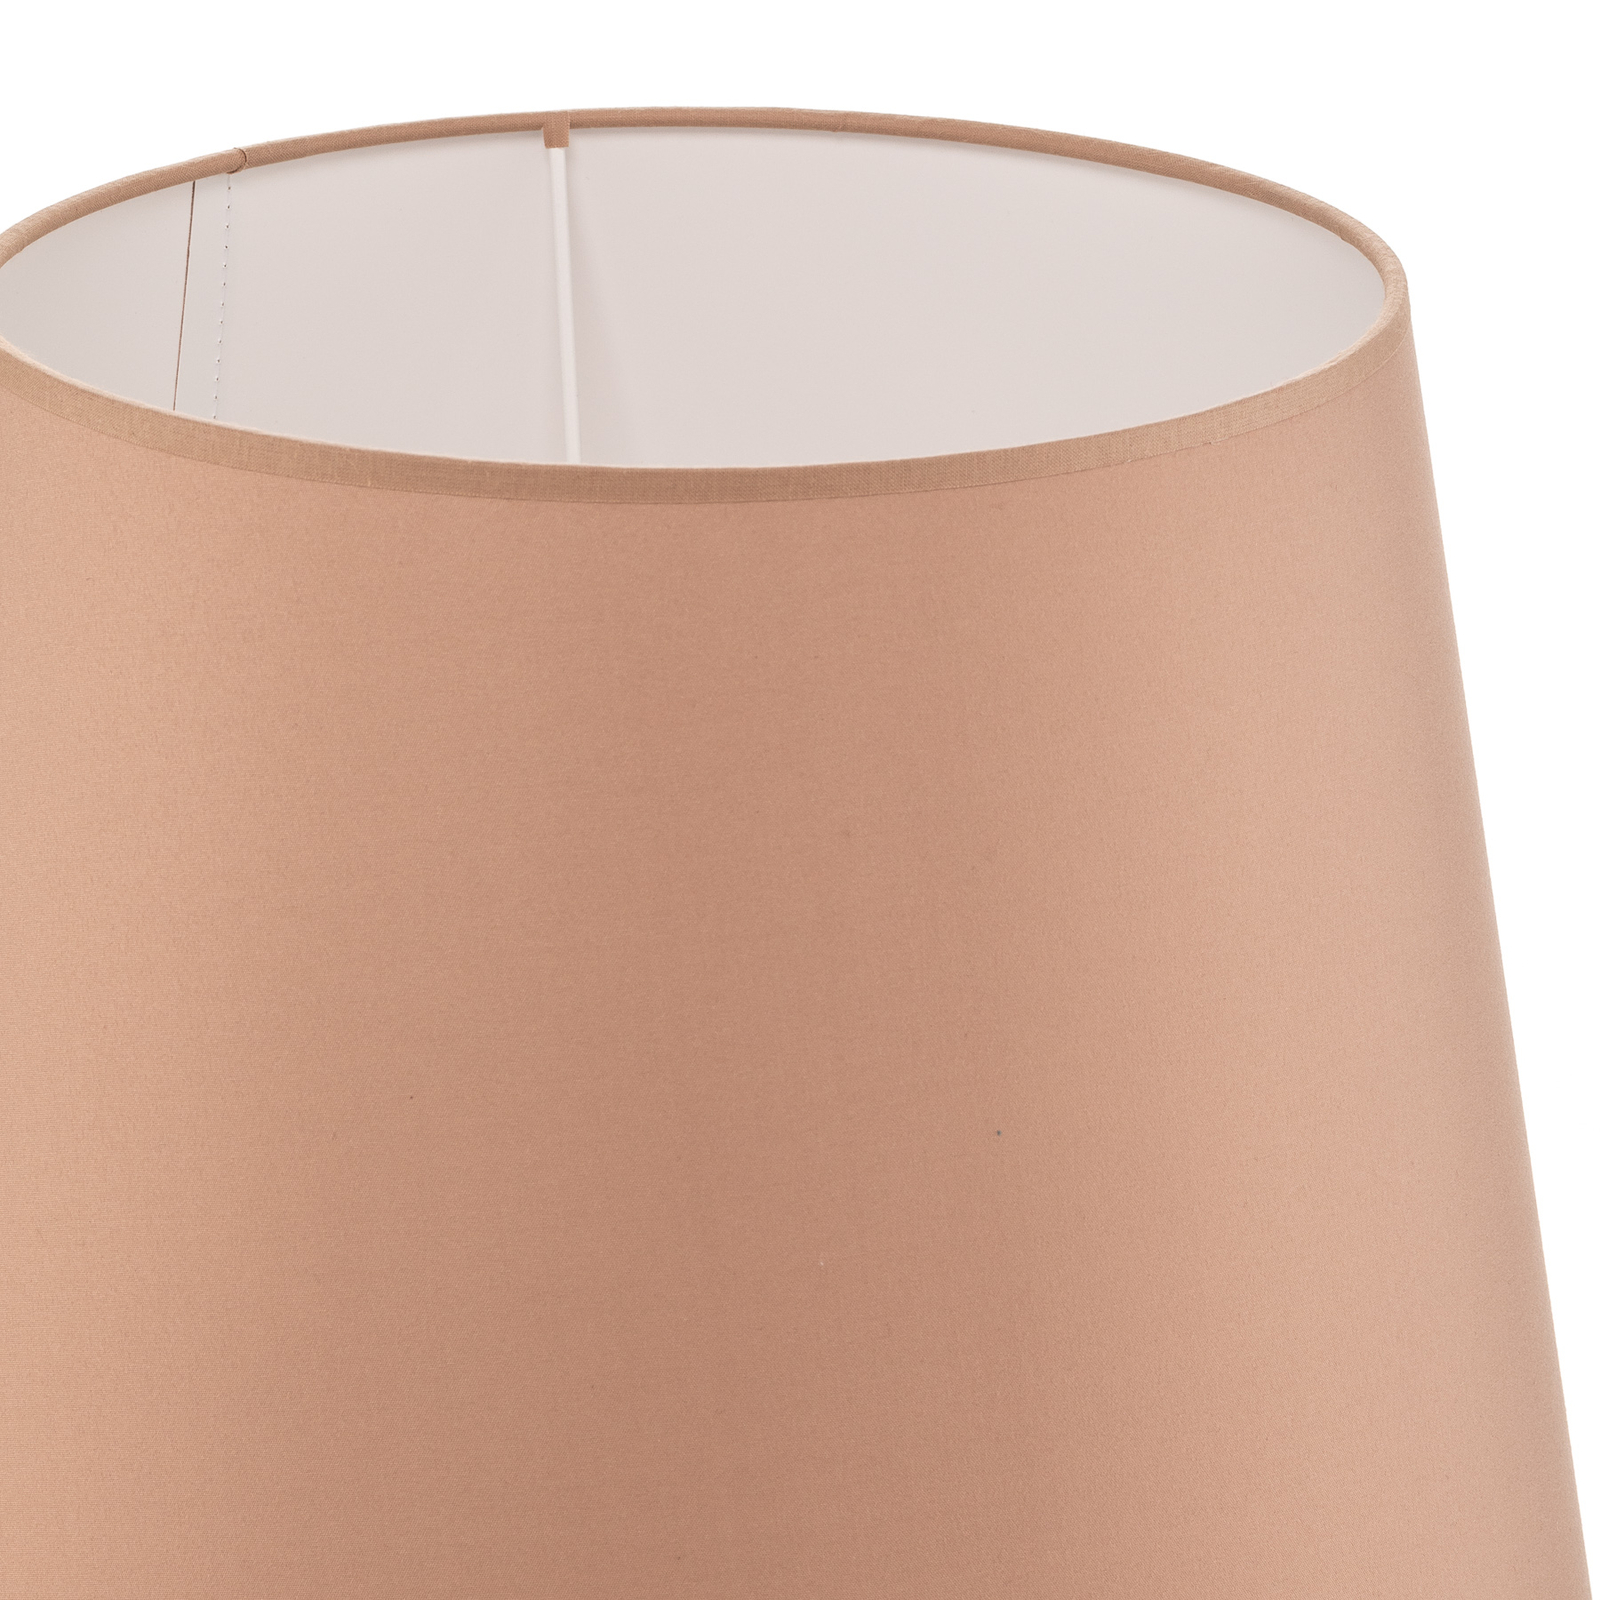 Classic L lampshade for floor lamps, cappuccino